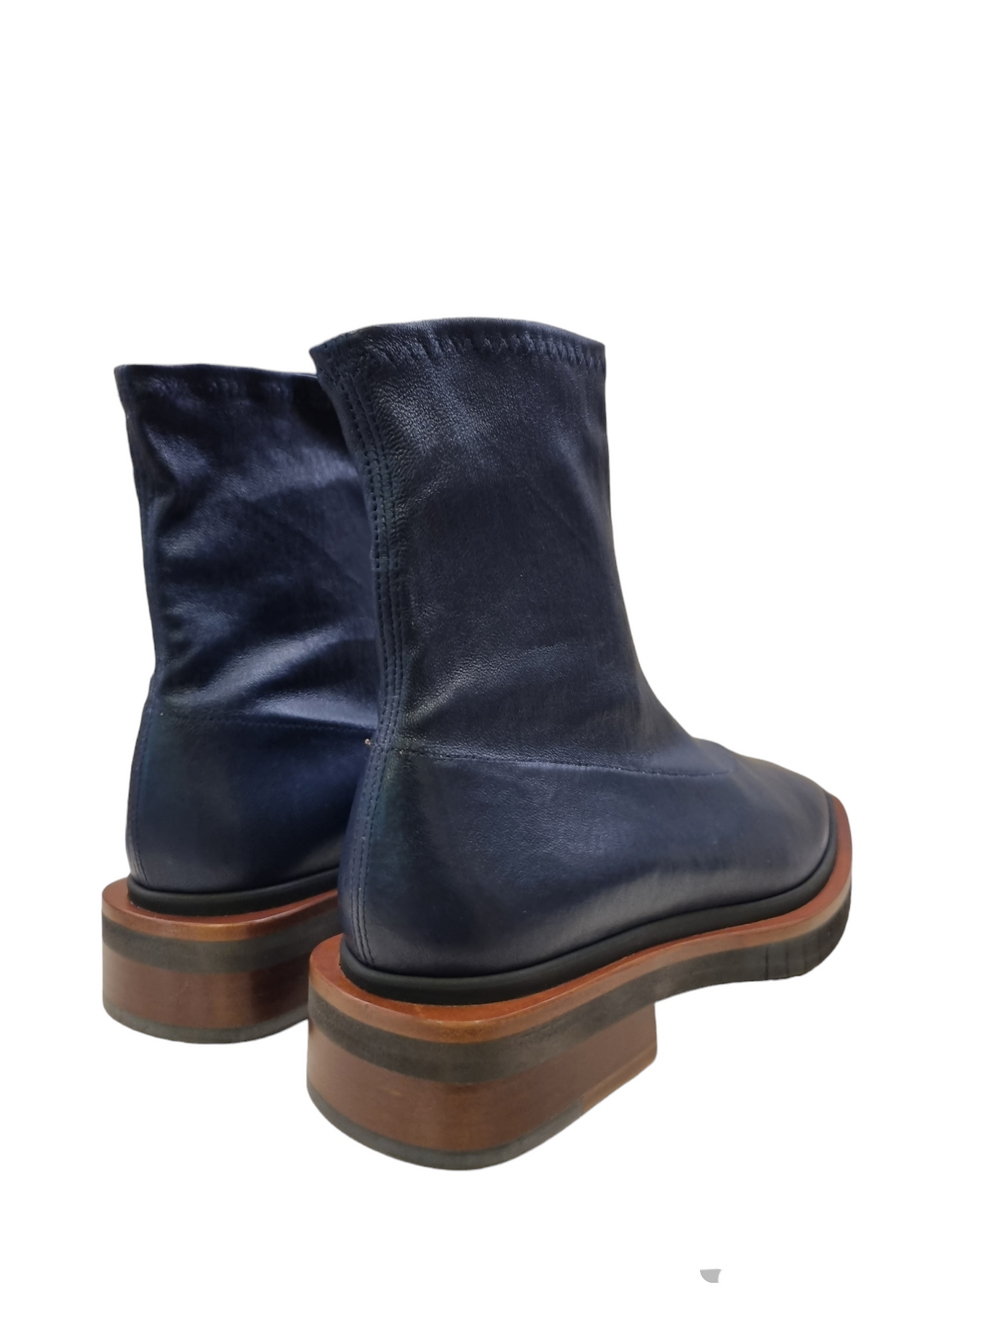 Bailey Navy Leather Boots - Clergerie - Liberty Shoes Australia